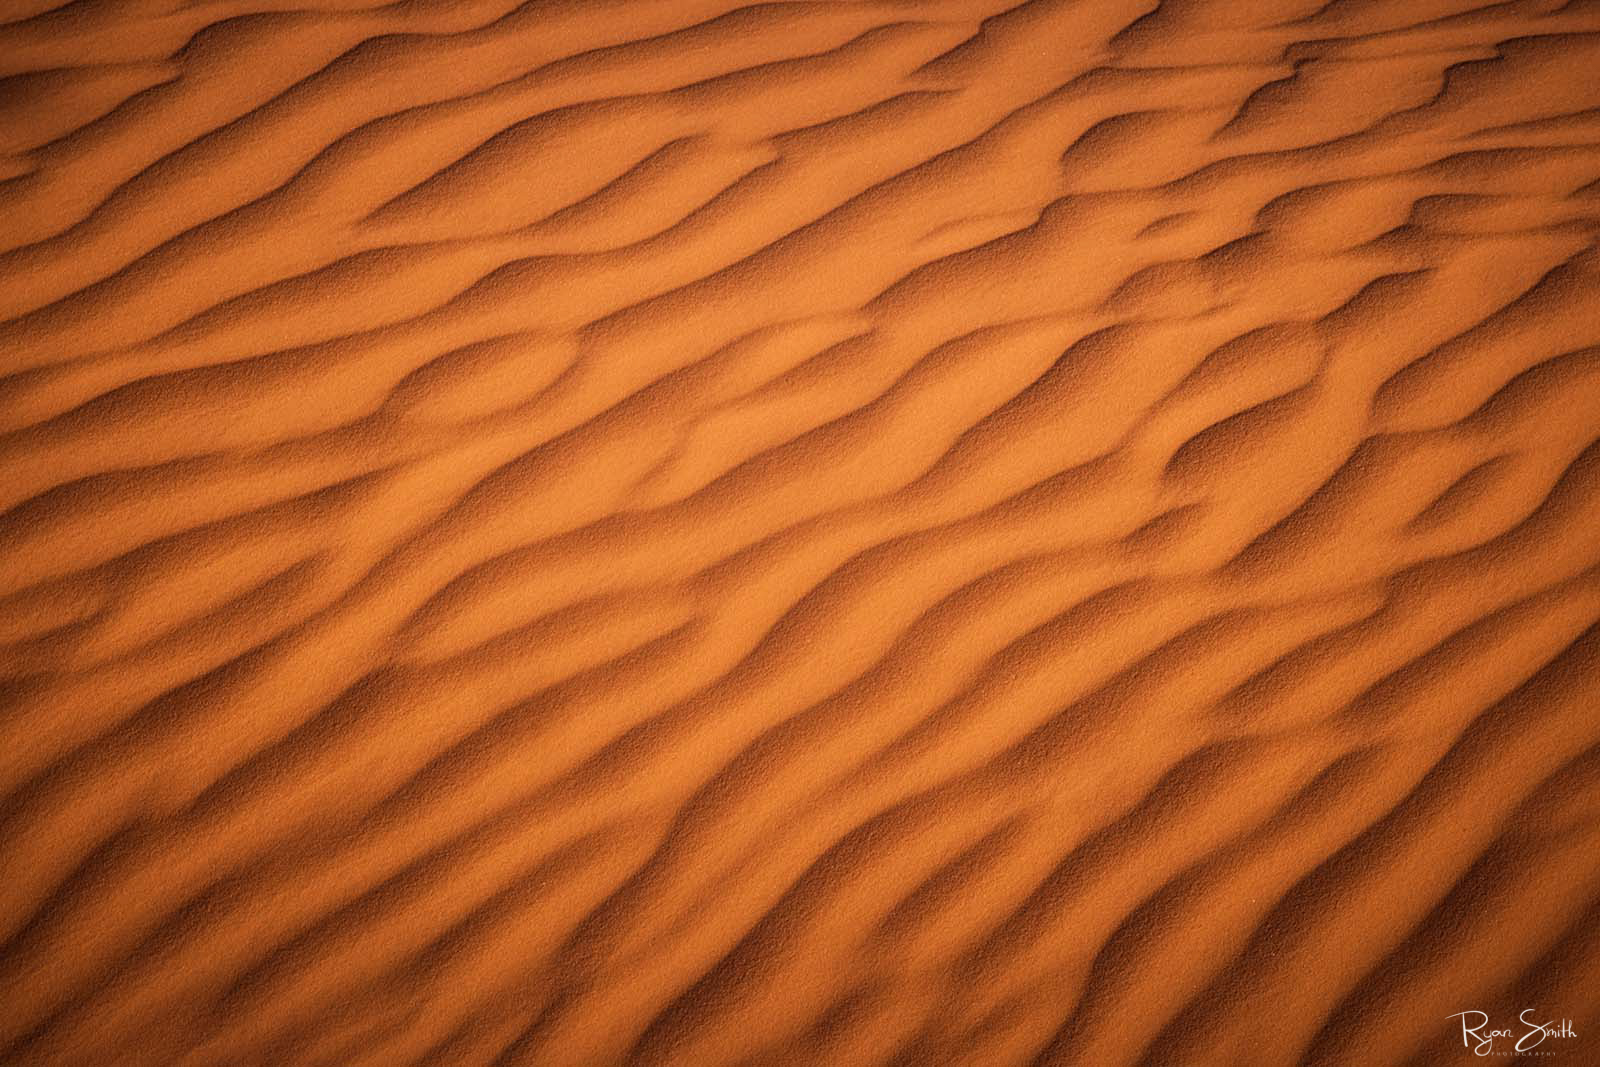 Desert sand up close creates an abstract wave pattern with beautiful shadows and light.  Appears as if its the ocean floor without water. 